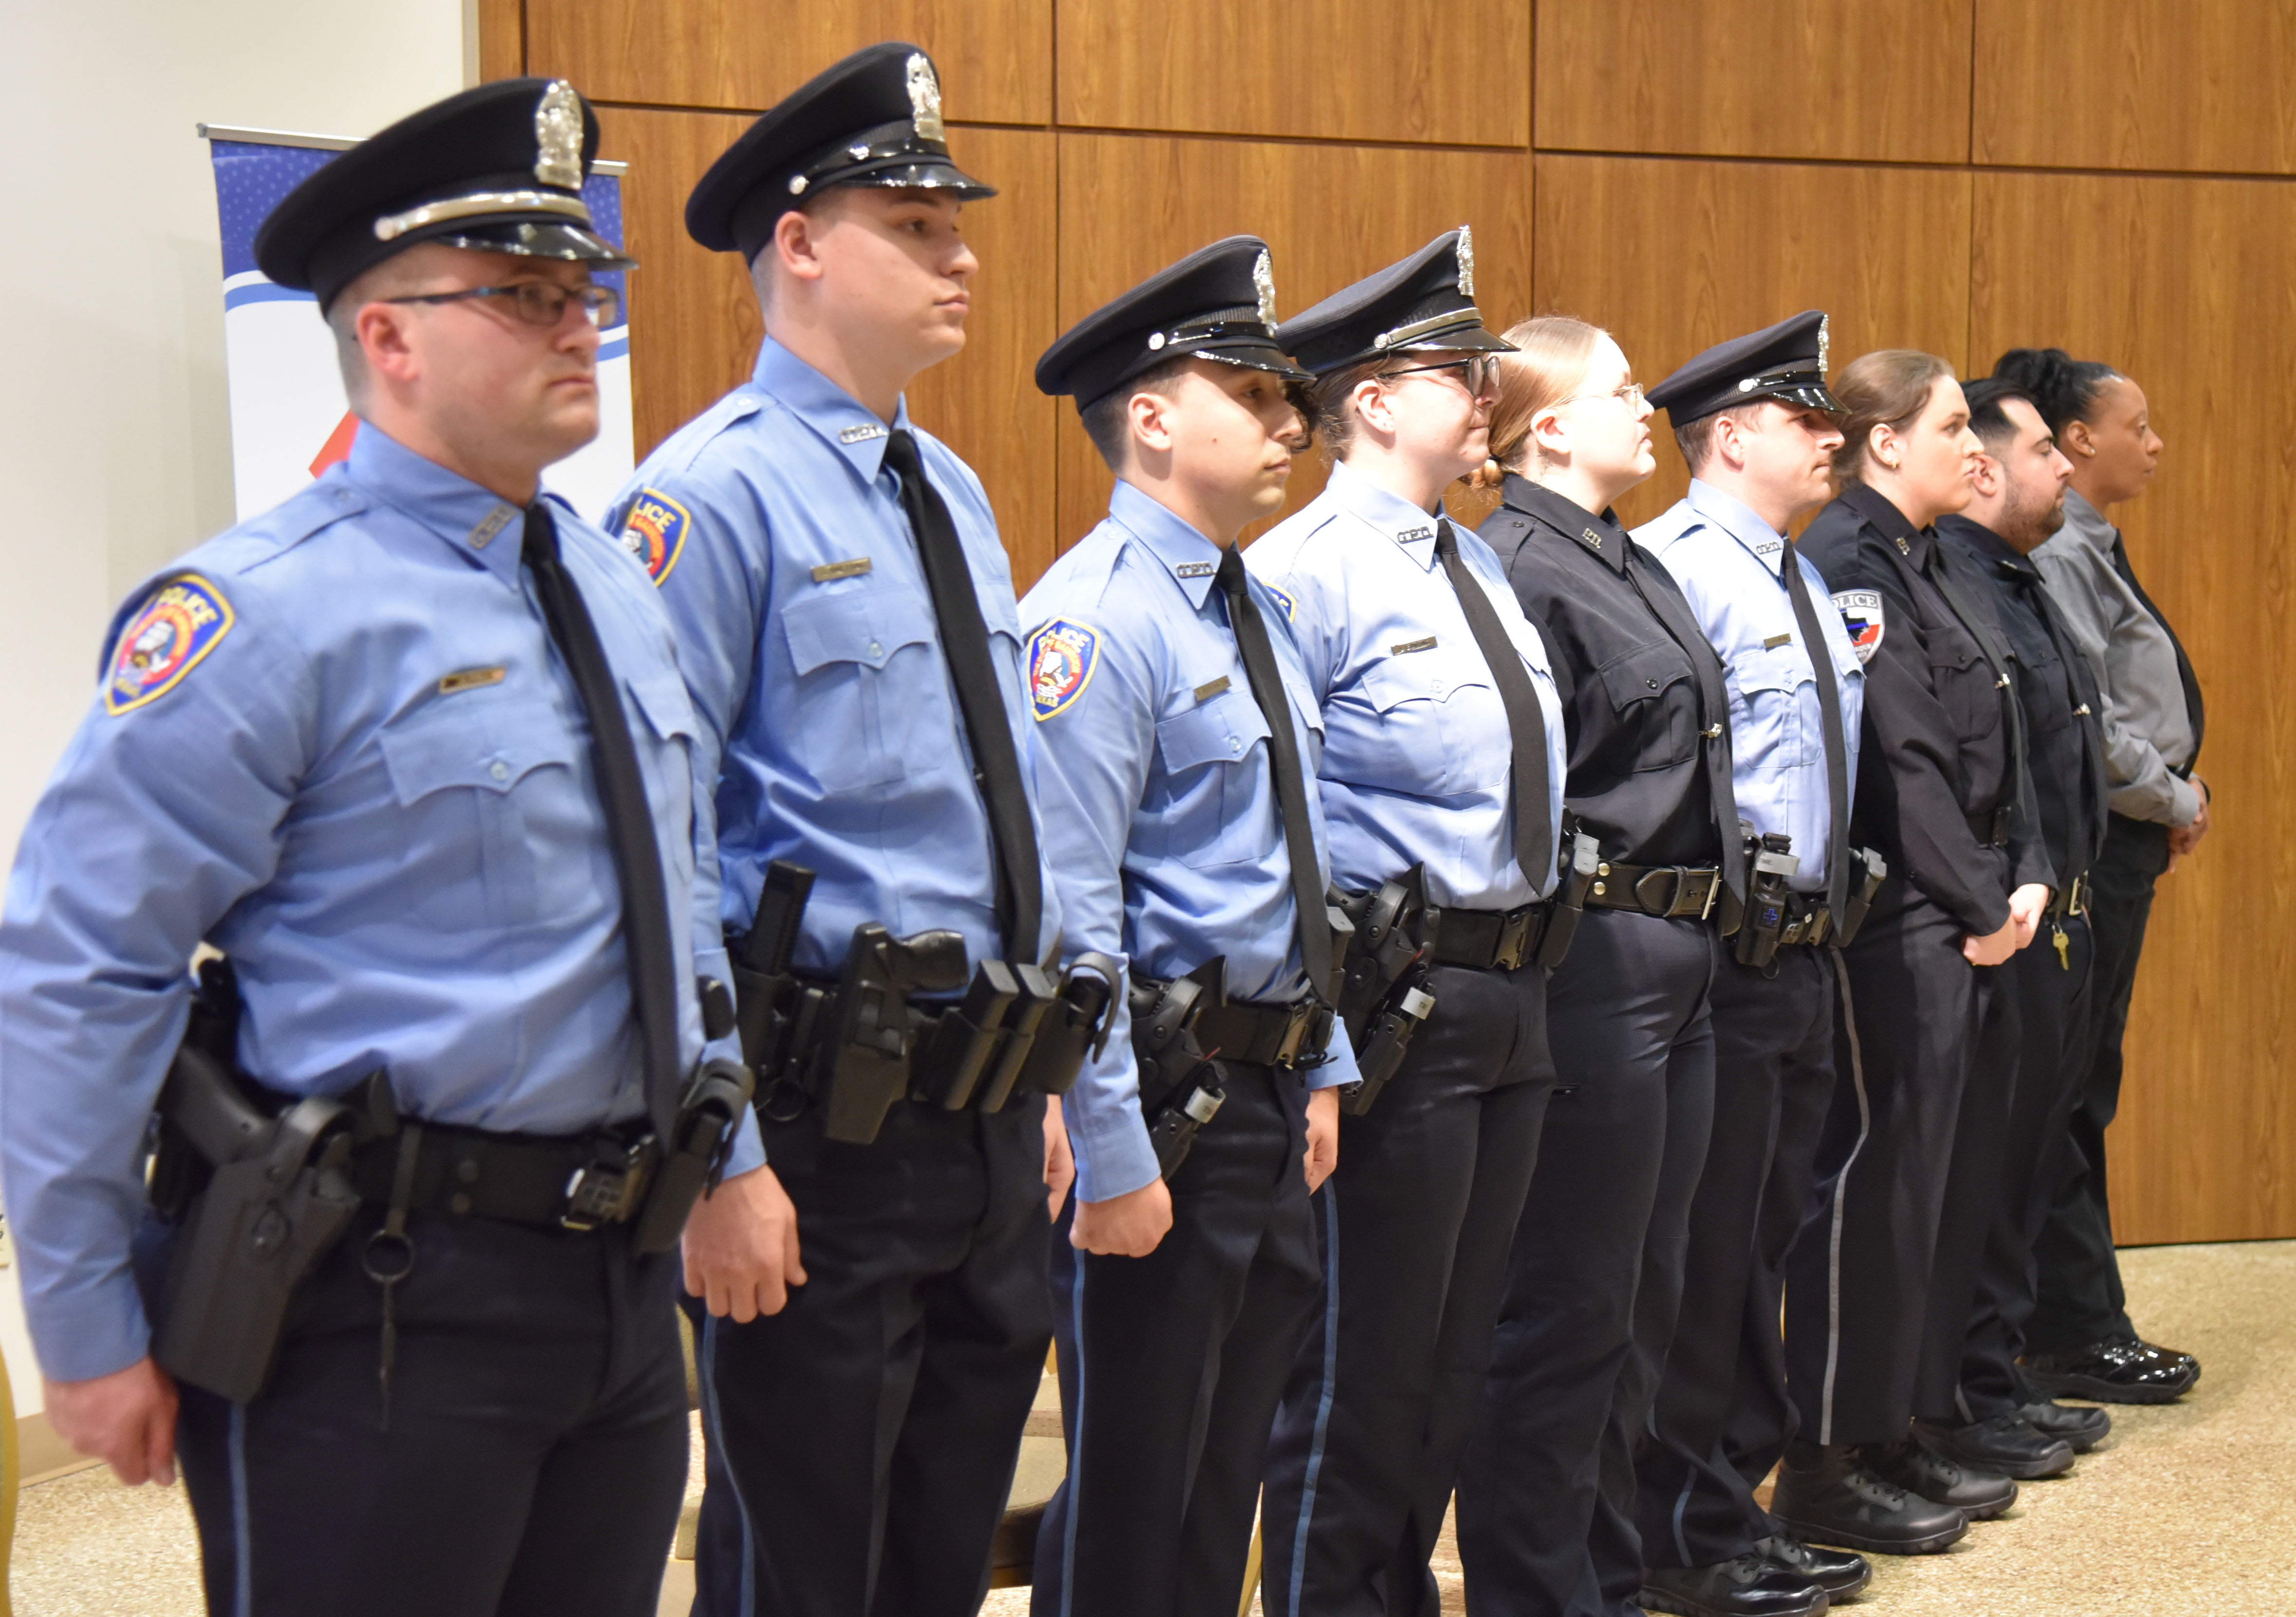 Students of the law enforcement program stand at attention at their graduation